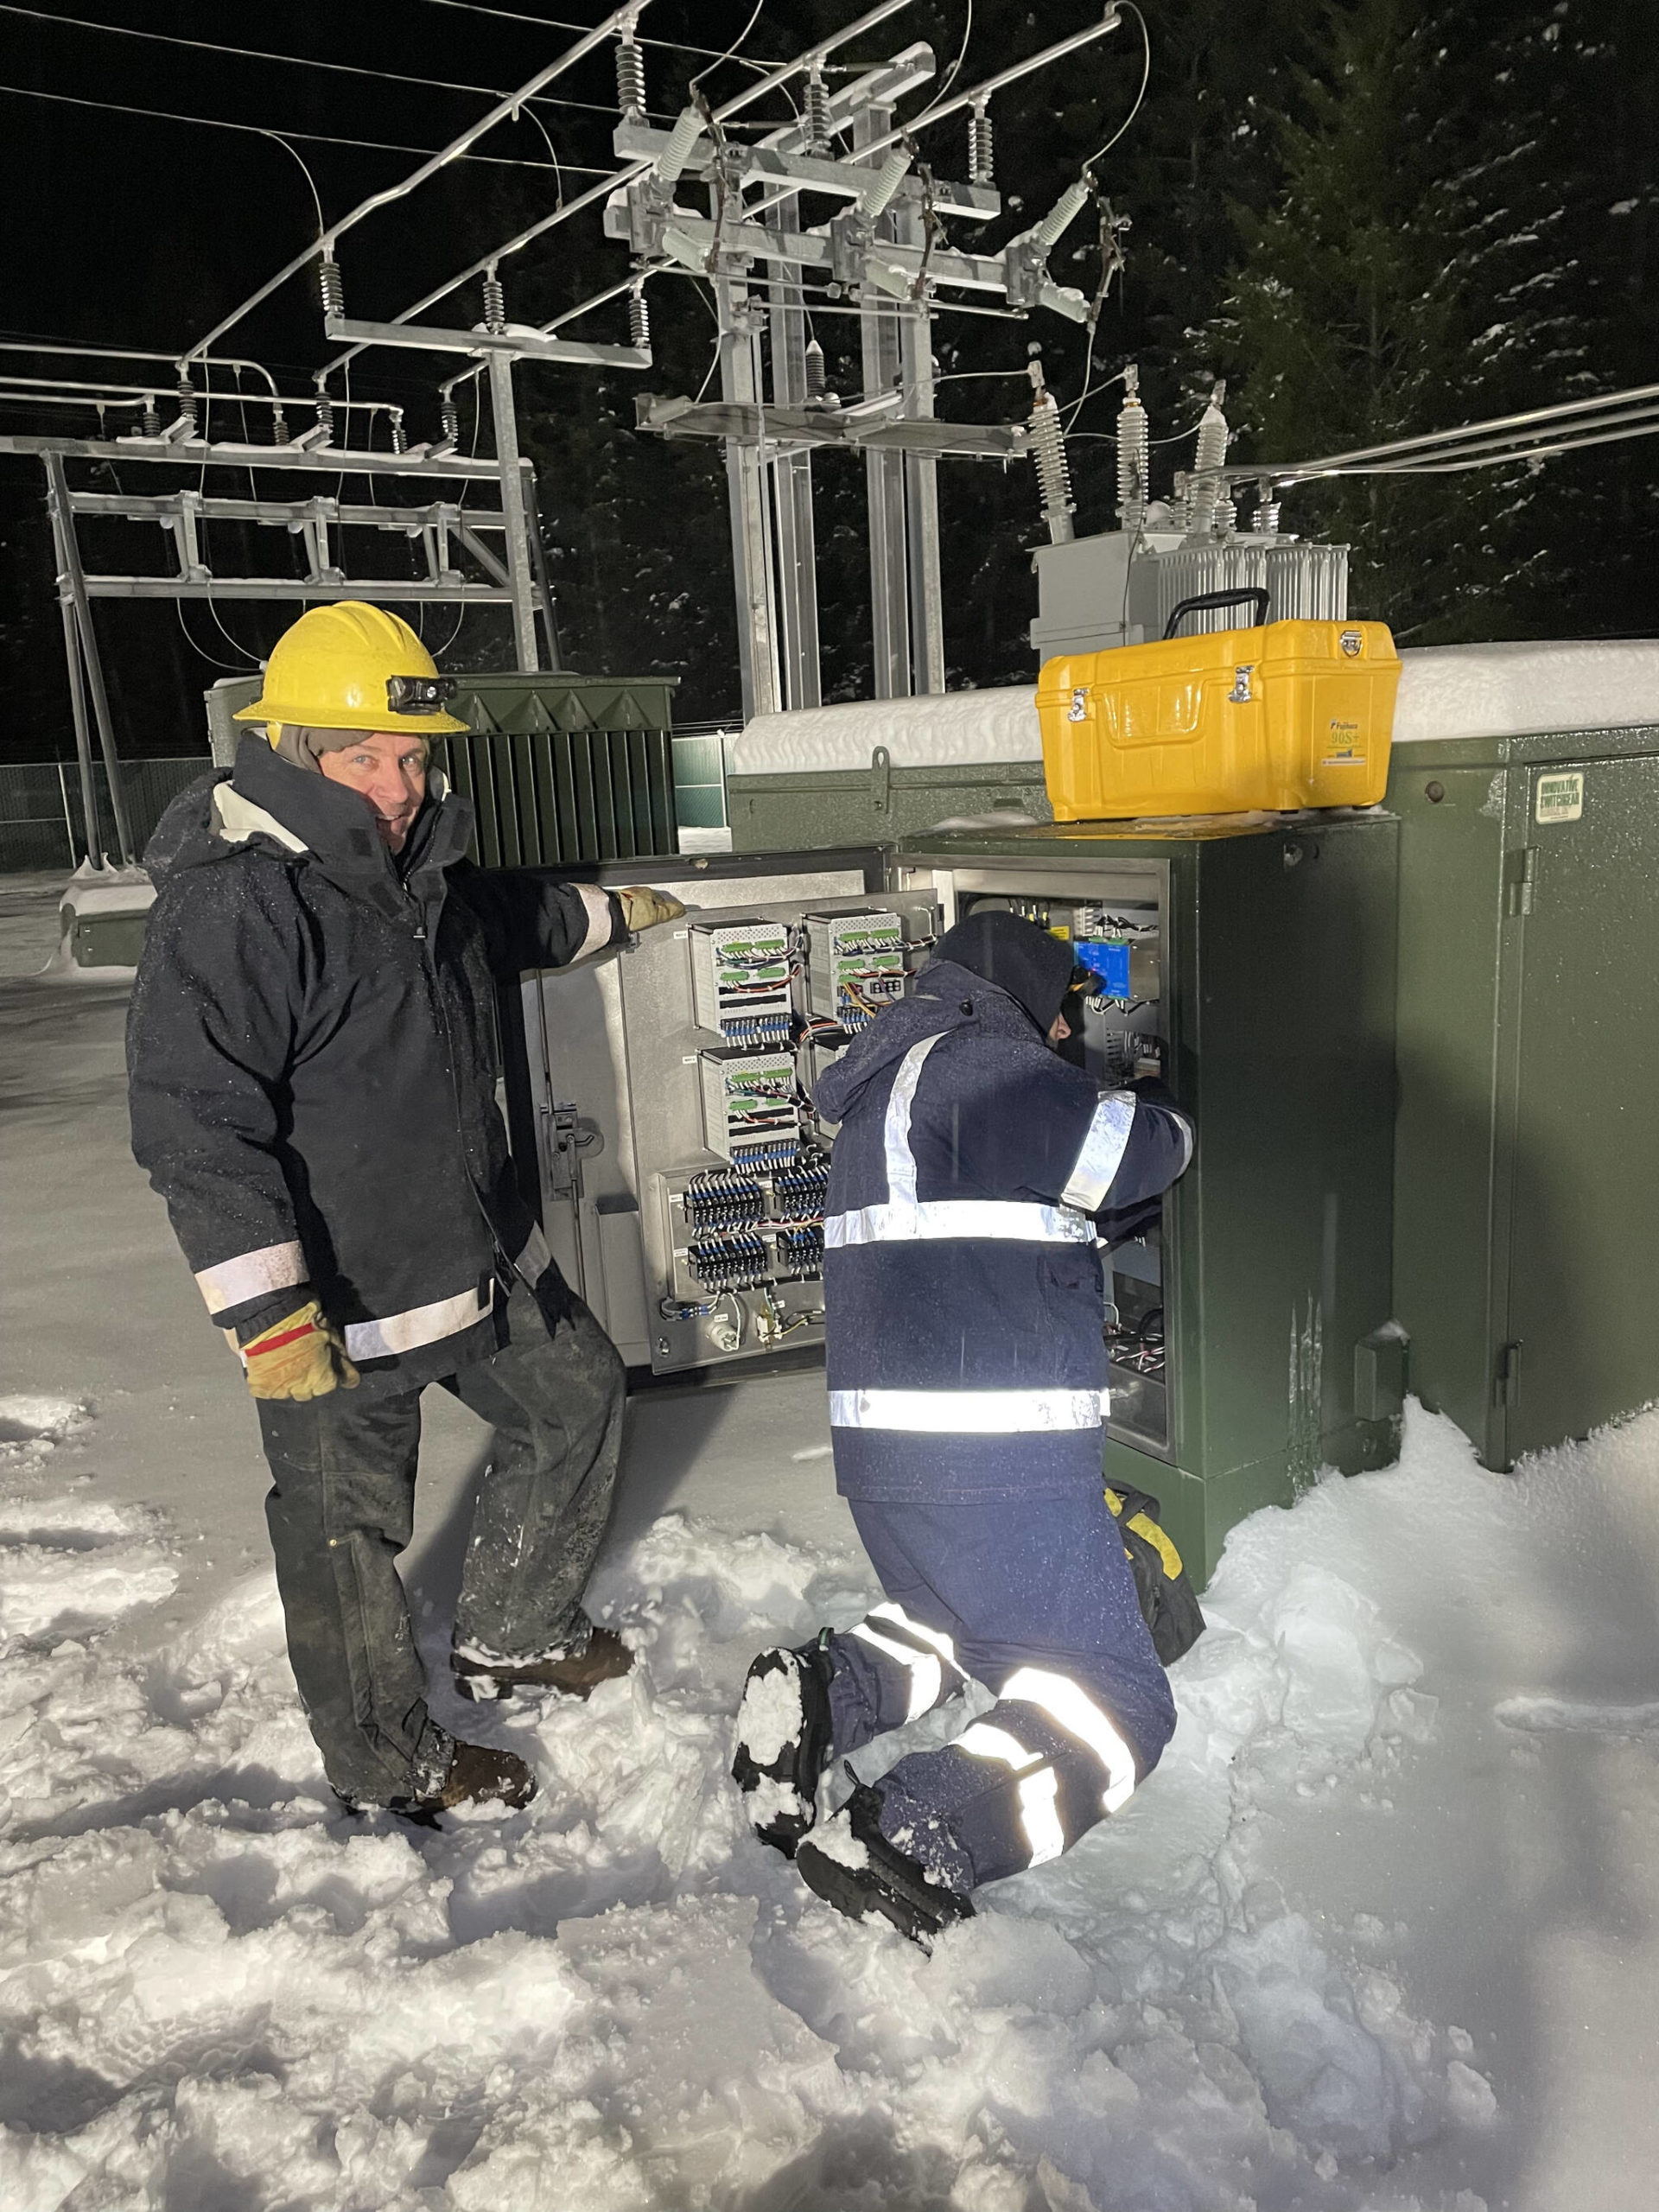 OPALCO crew making repairs in the snow on Dec. 23 at 5:22 a.m.